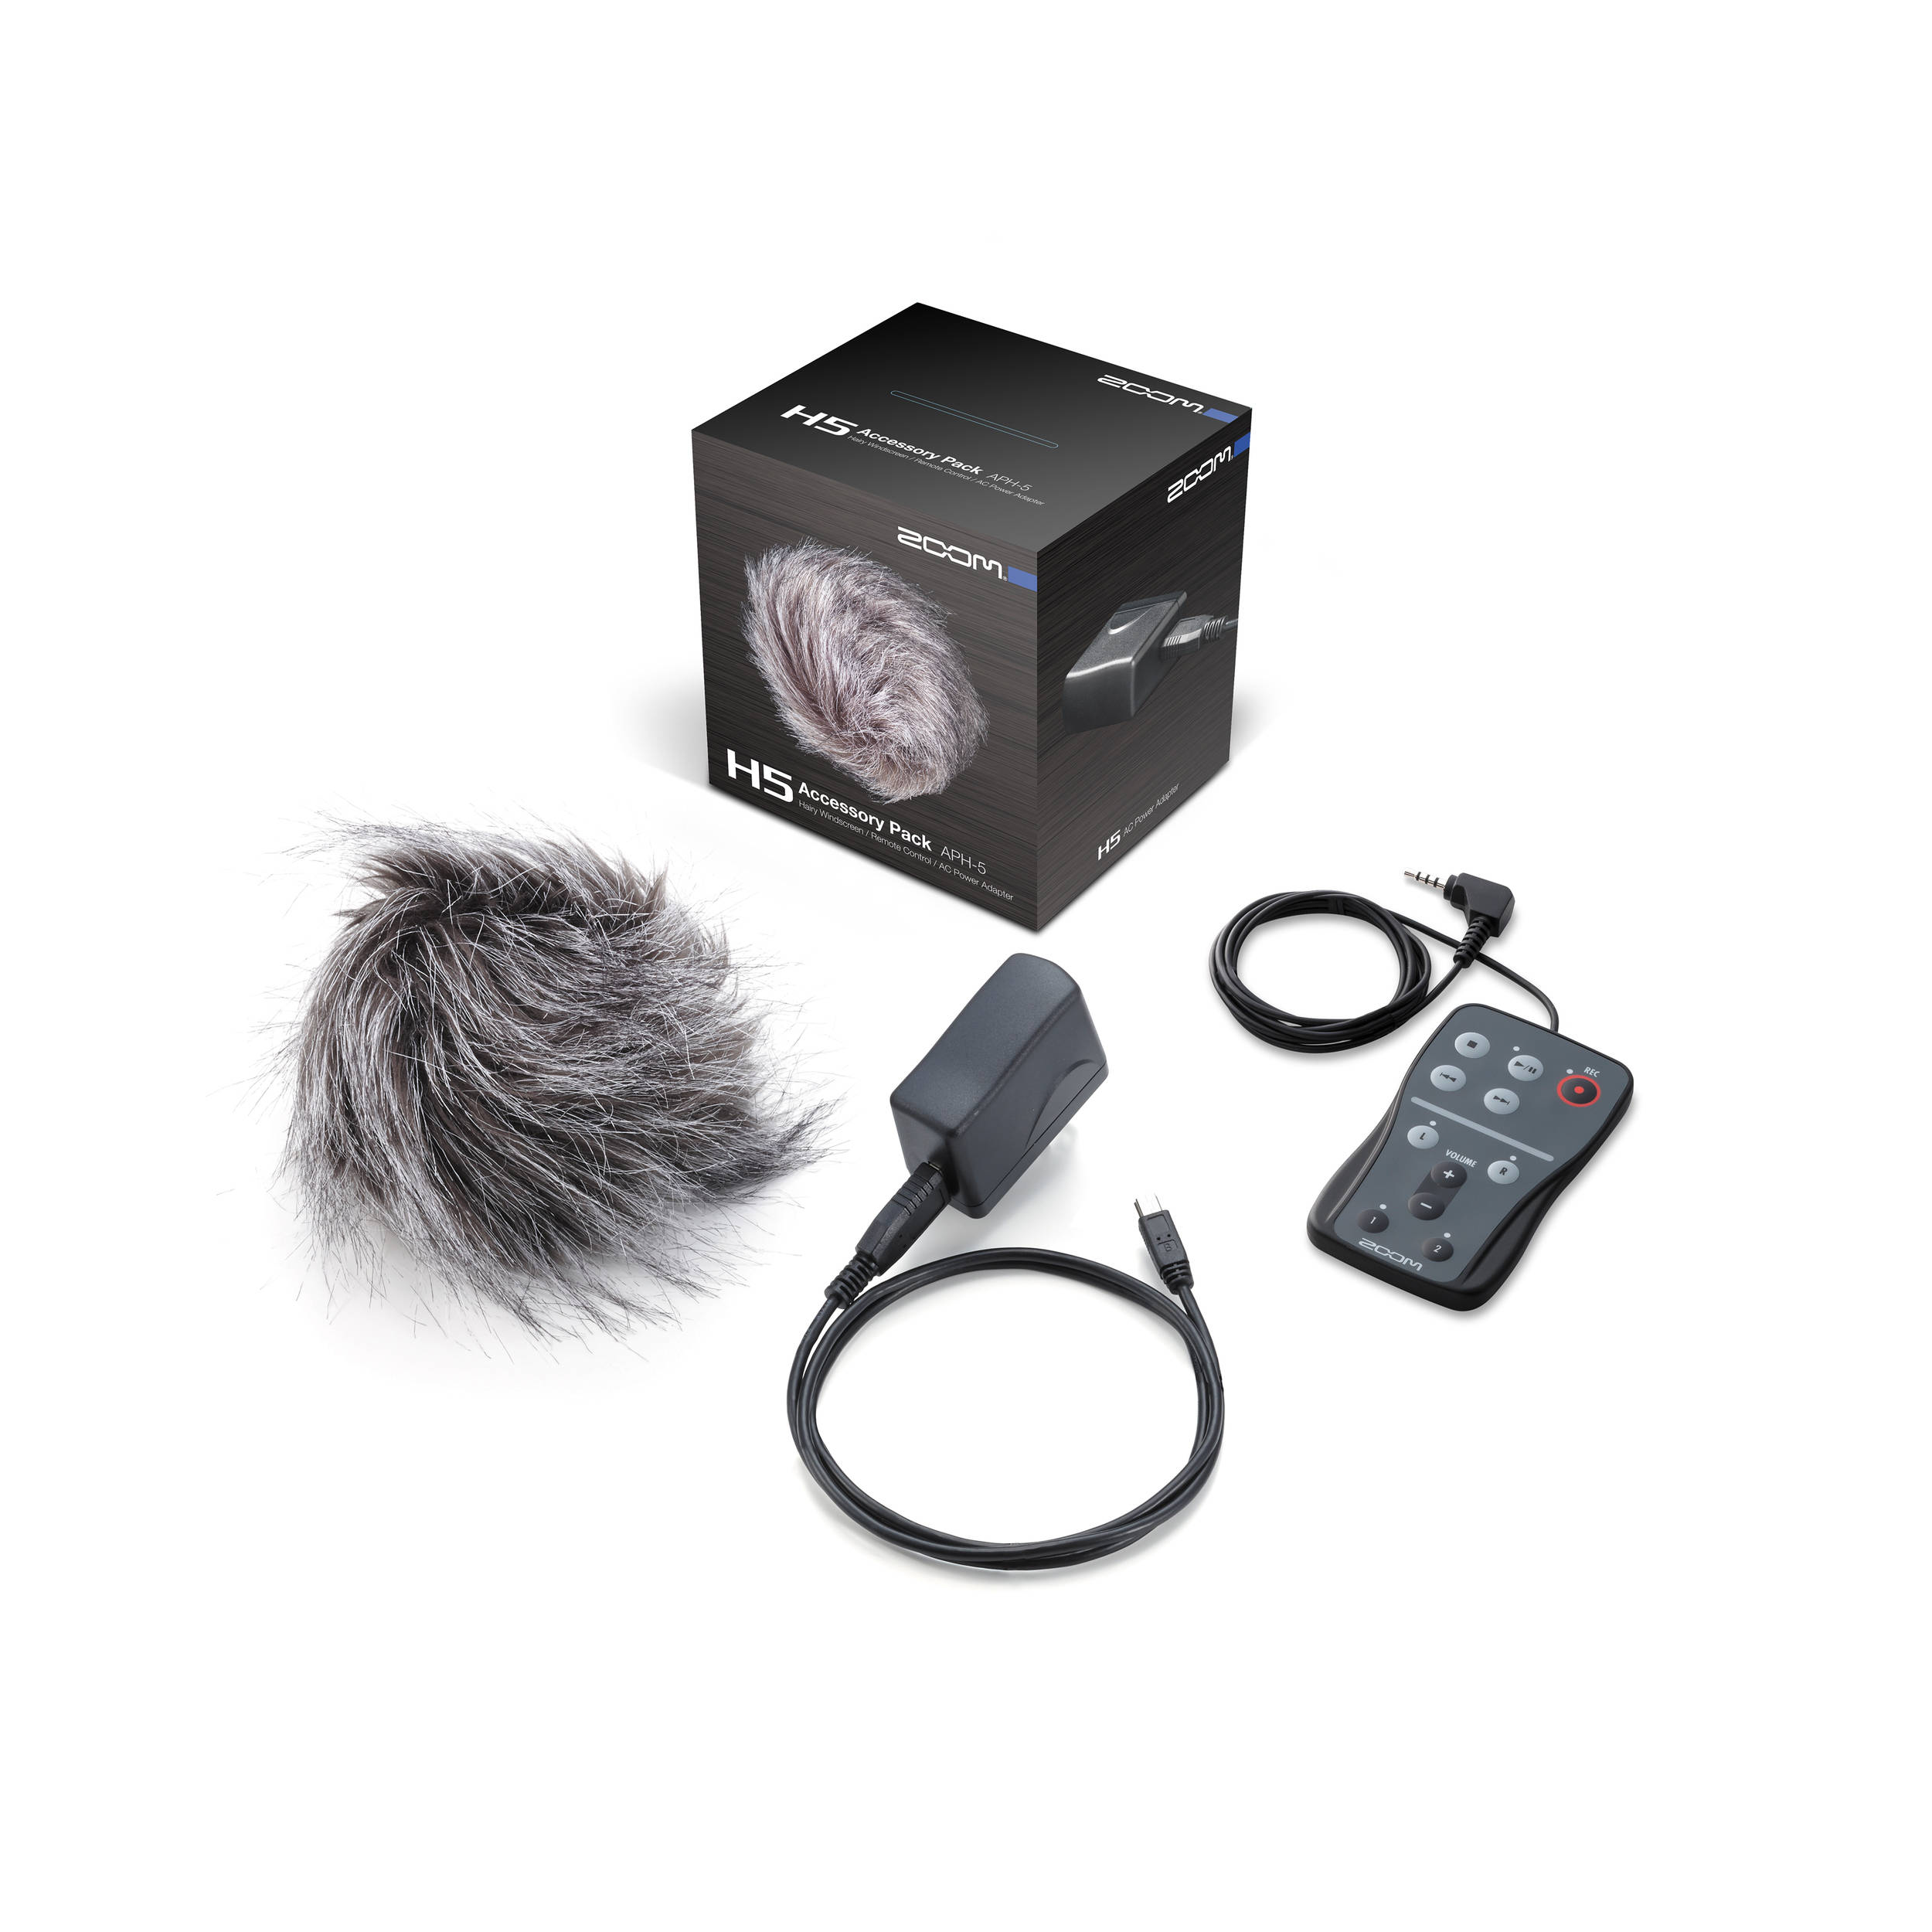 Zoom APH-5 Accessory Pack for Zoom H5 Recorder